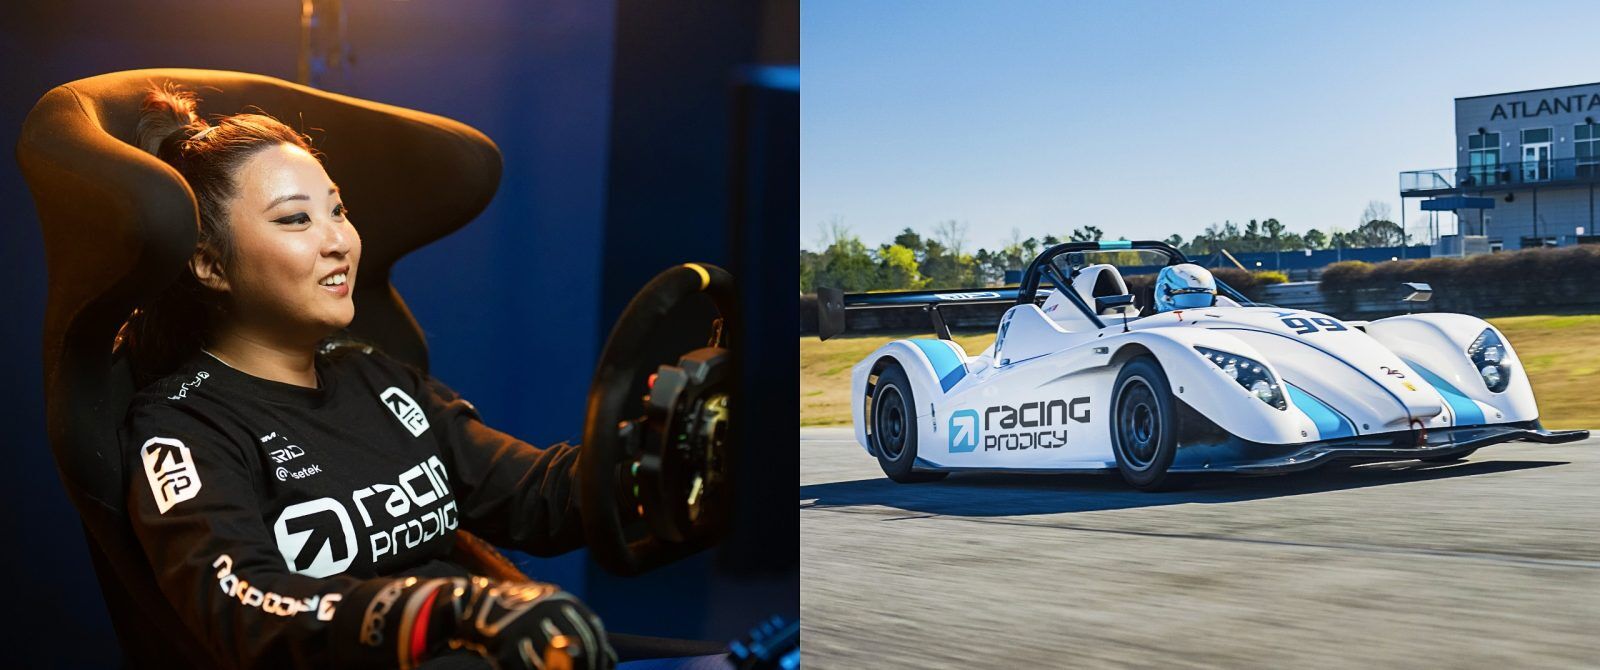 A woman on the left sat in a gaming chair using a steering wheel, and a Radical racing car on the right.